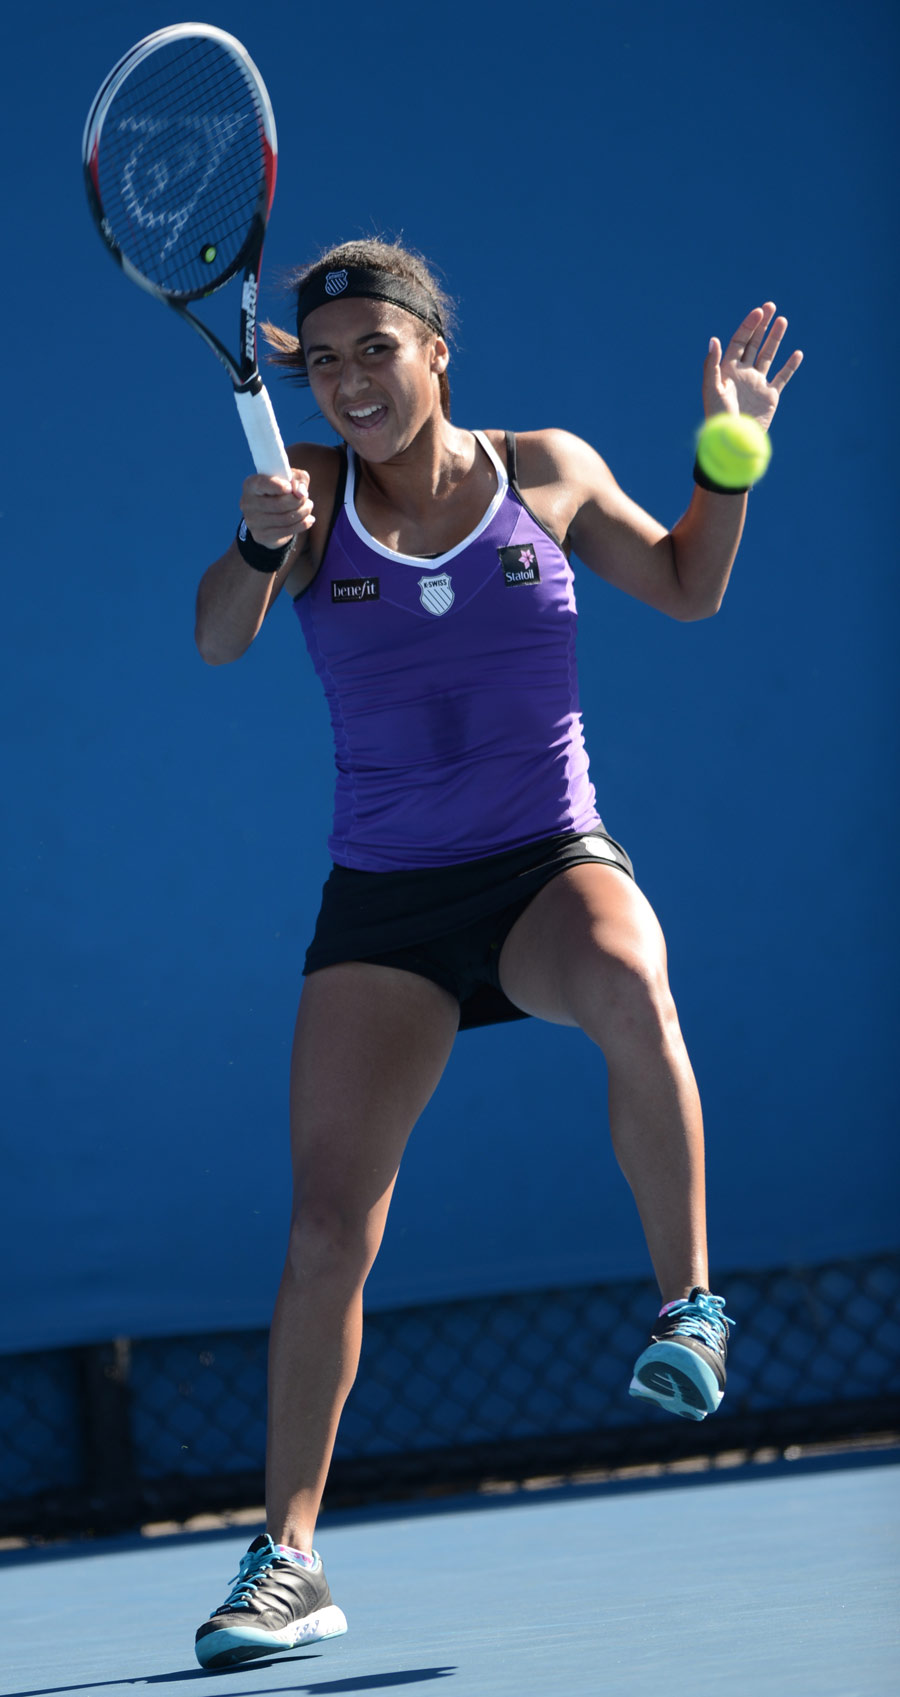 Heather Watson lines up a forehand